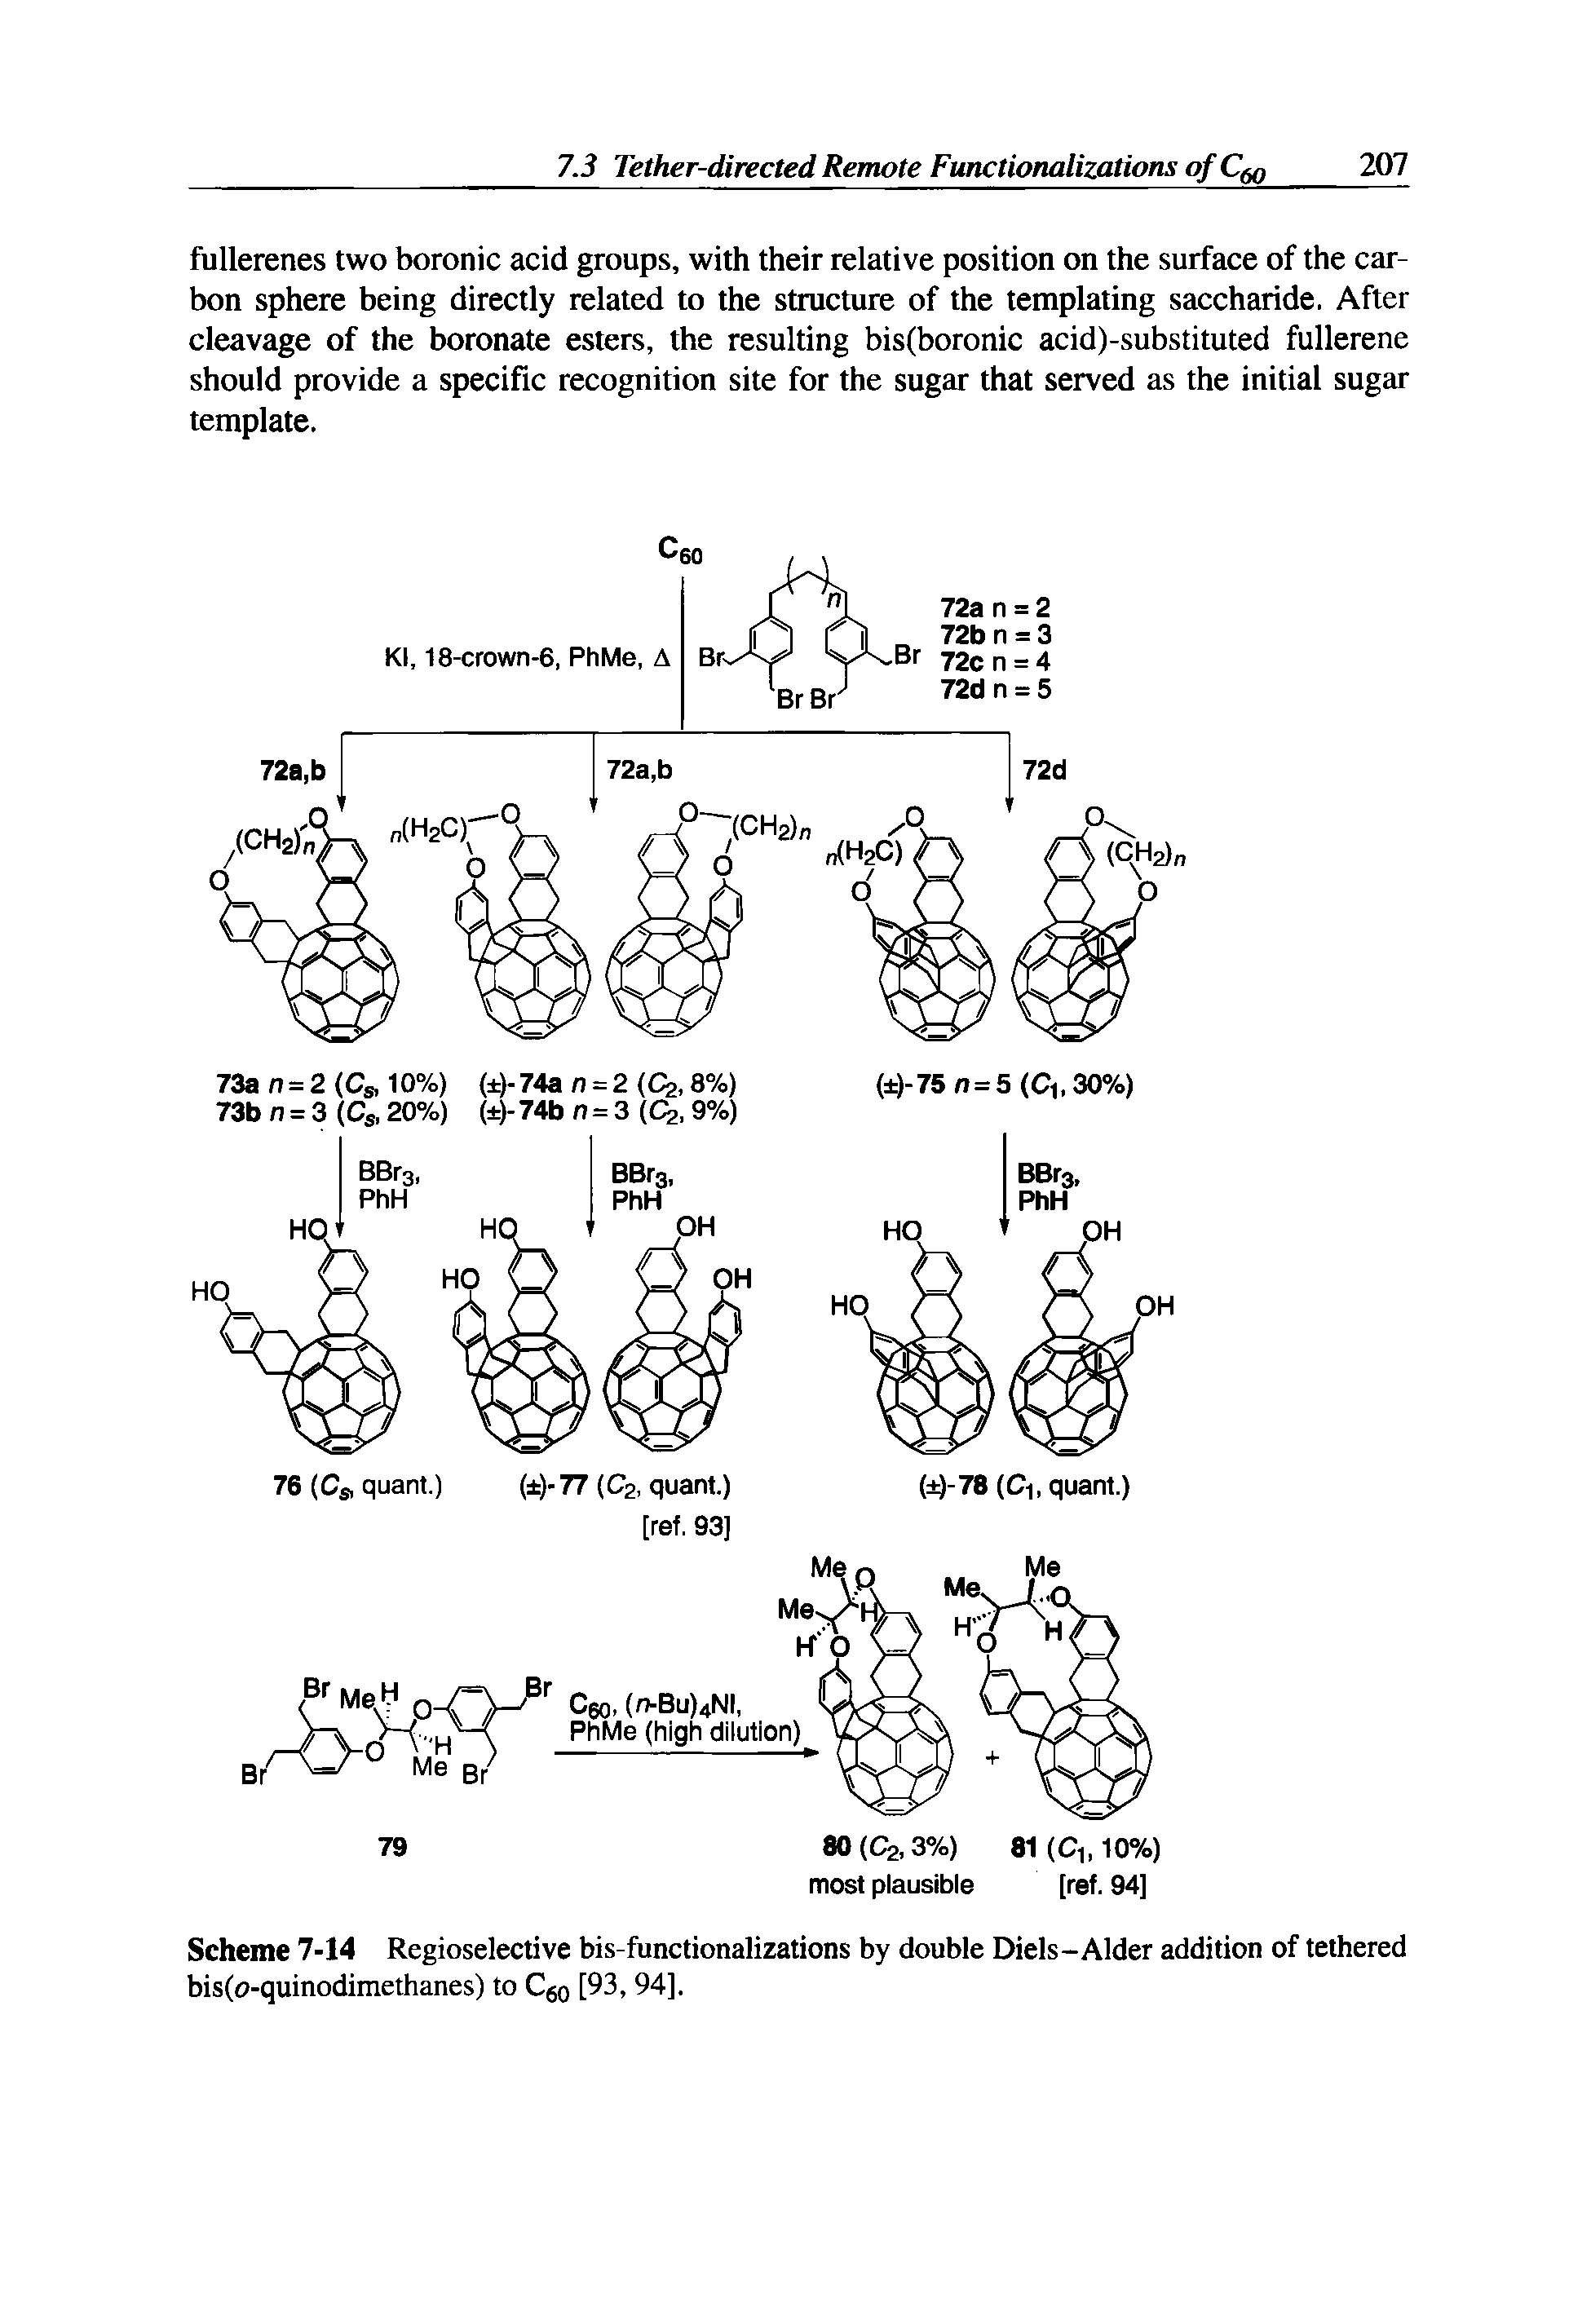 Scheme 7-14 Regioselective bis-functionalizations by double Diels-Alder addition of tethered bis(o-quinodimethanes) to Cgo [93, 94].